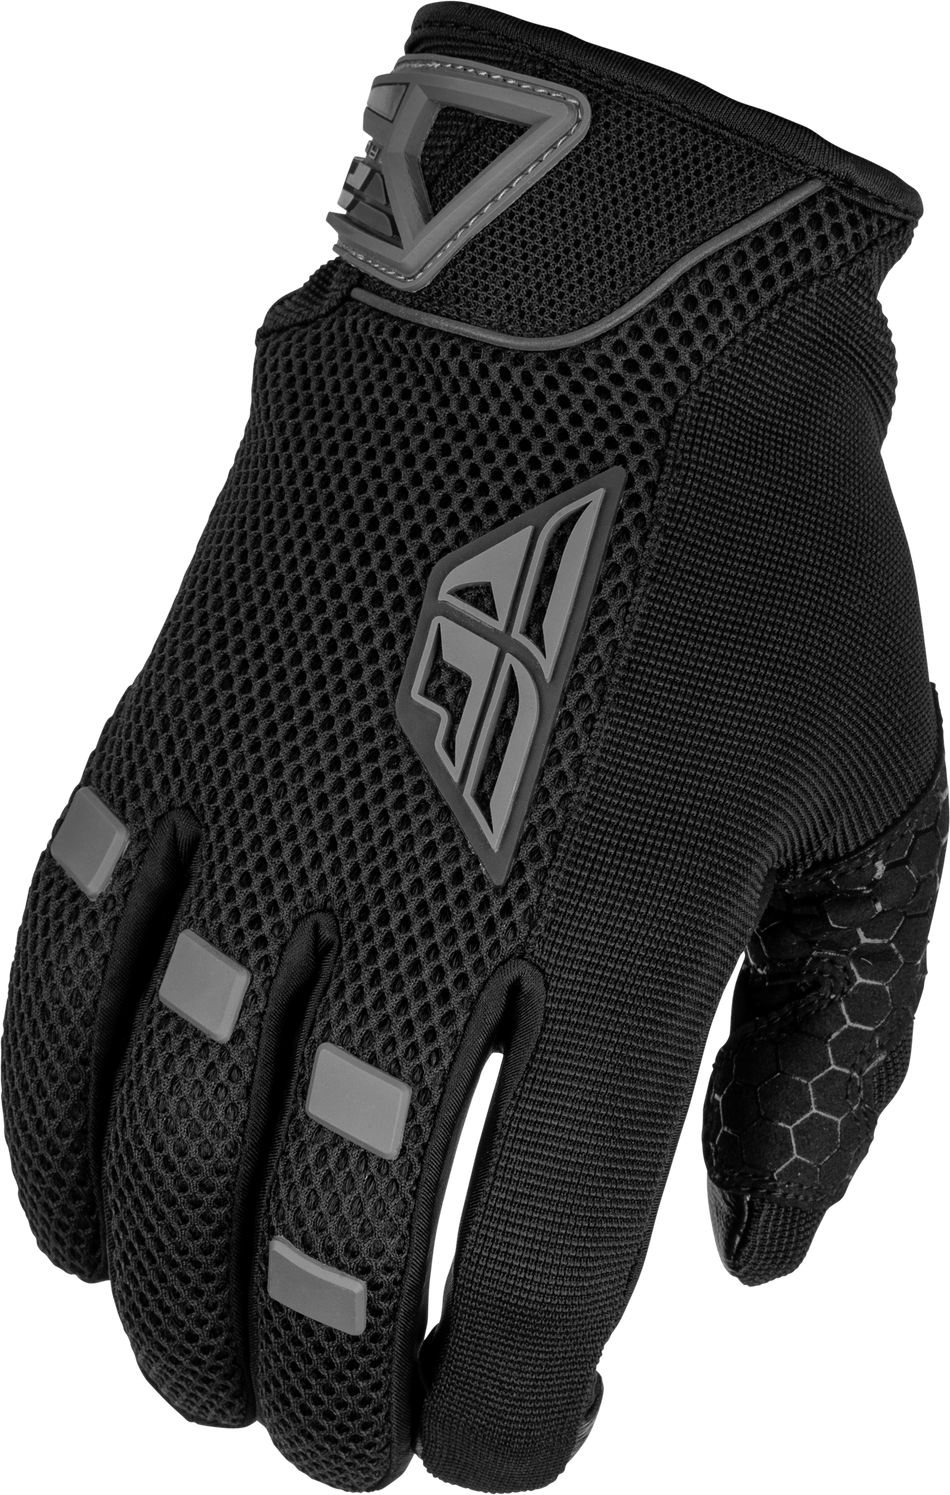 FLY RACING Women's Coolpro Gloves Black Lg 476-6214L